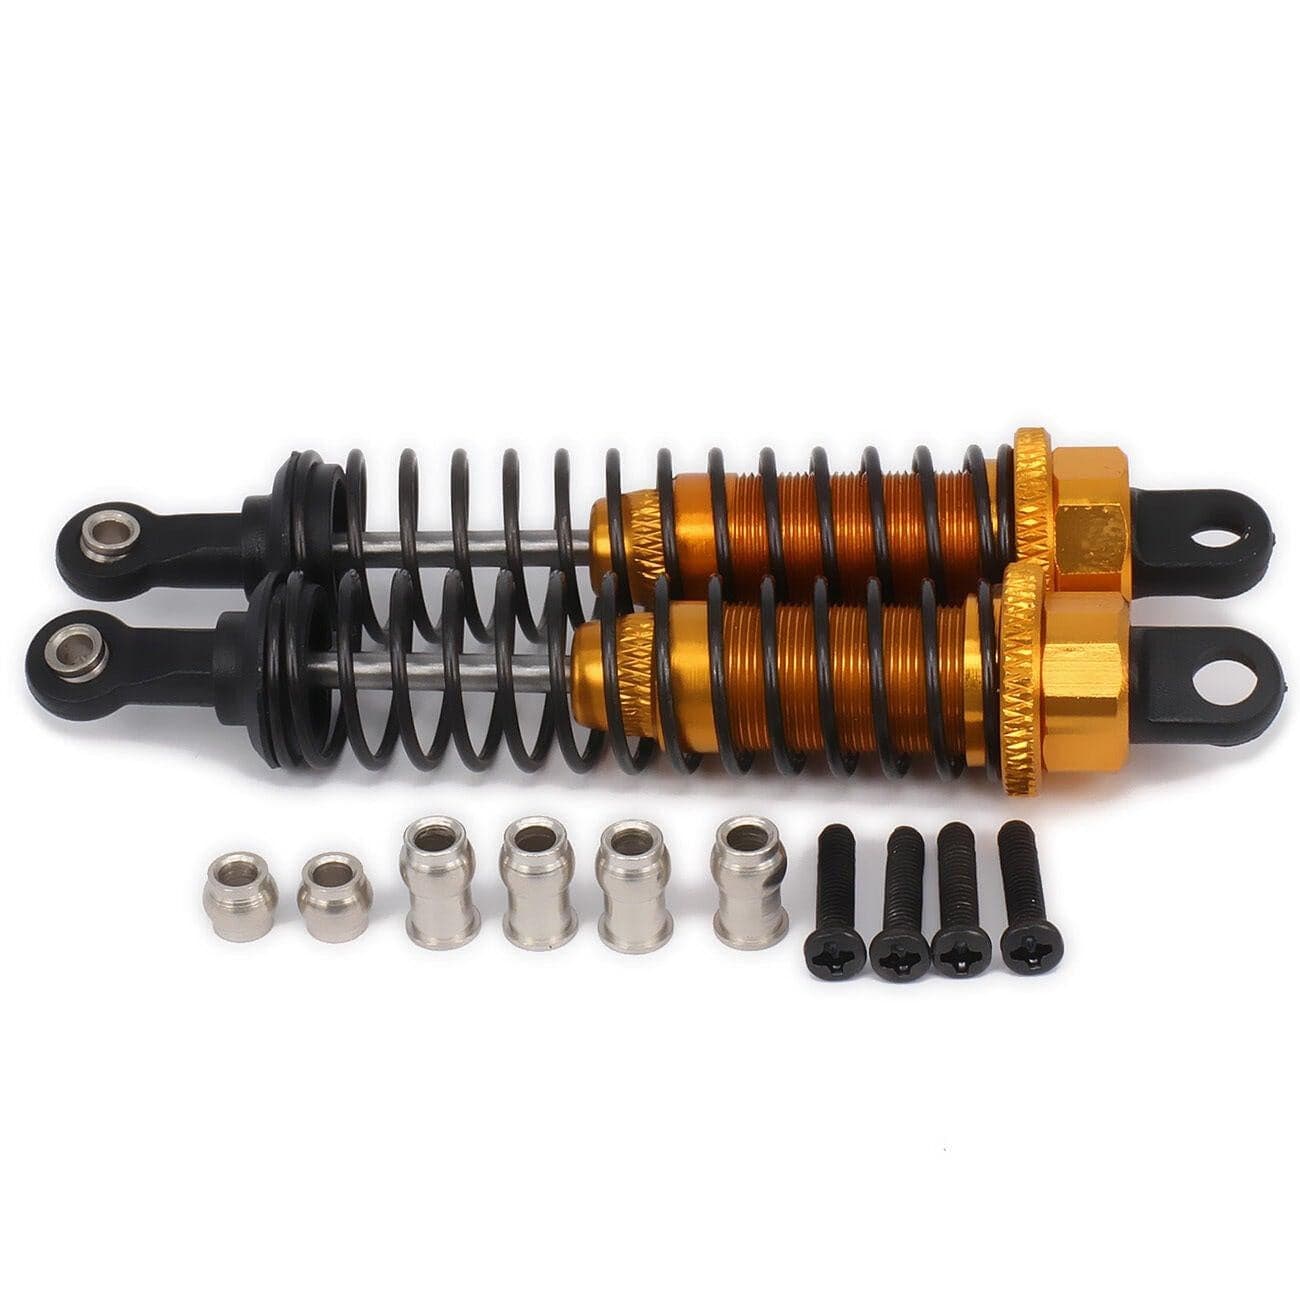 RCAWD RC CAR UPGRADE PARTS Yellow RCAWD 80mm Shock Absorber Damper Oil Adjustable Style for 1/16 Rc Car 2pcs